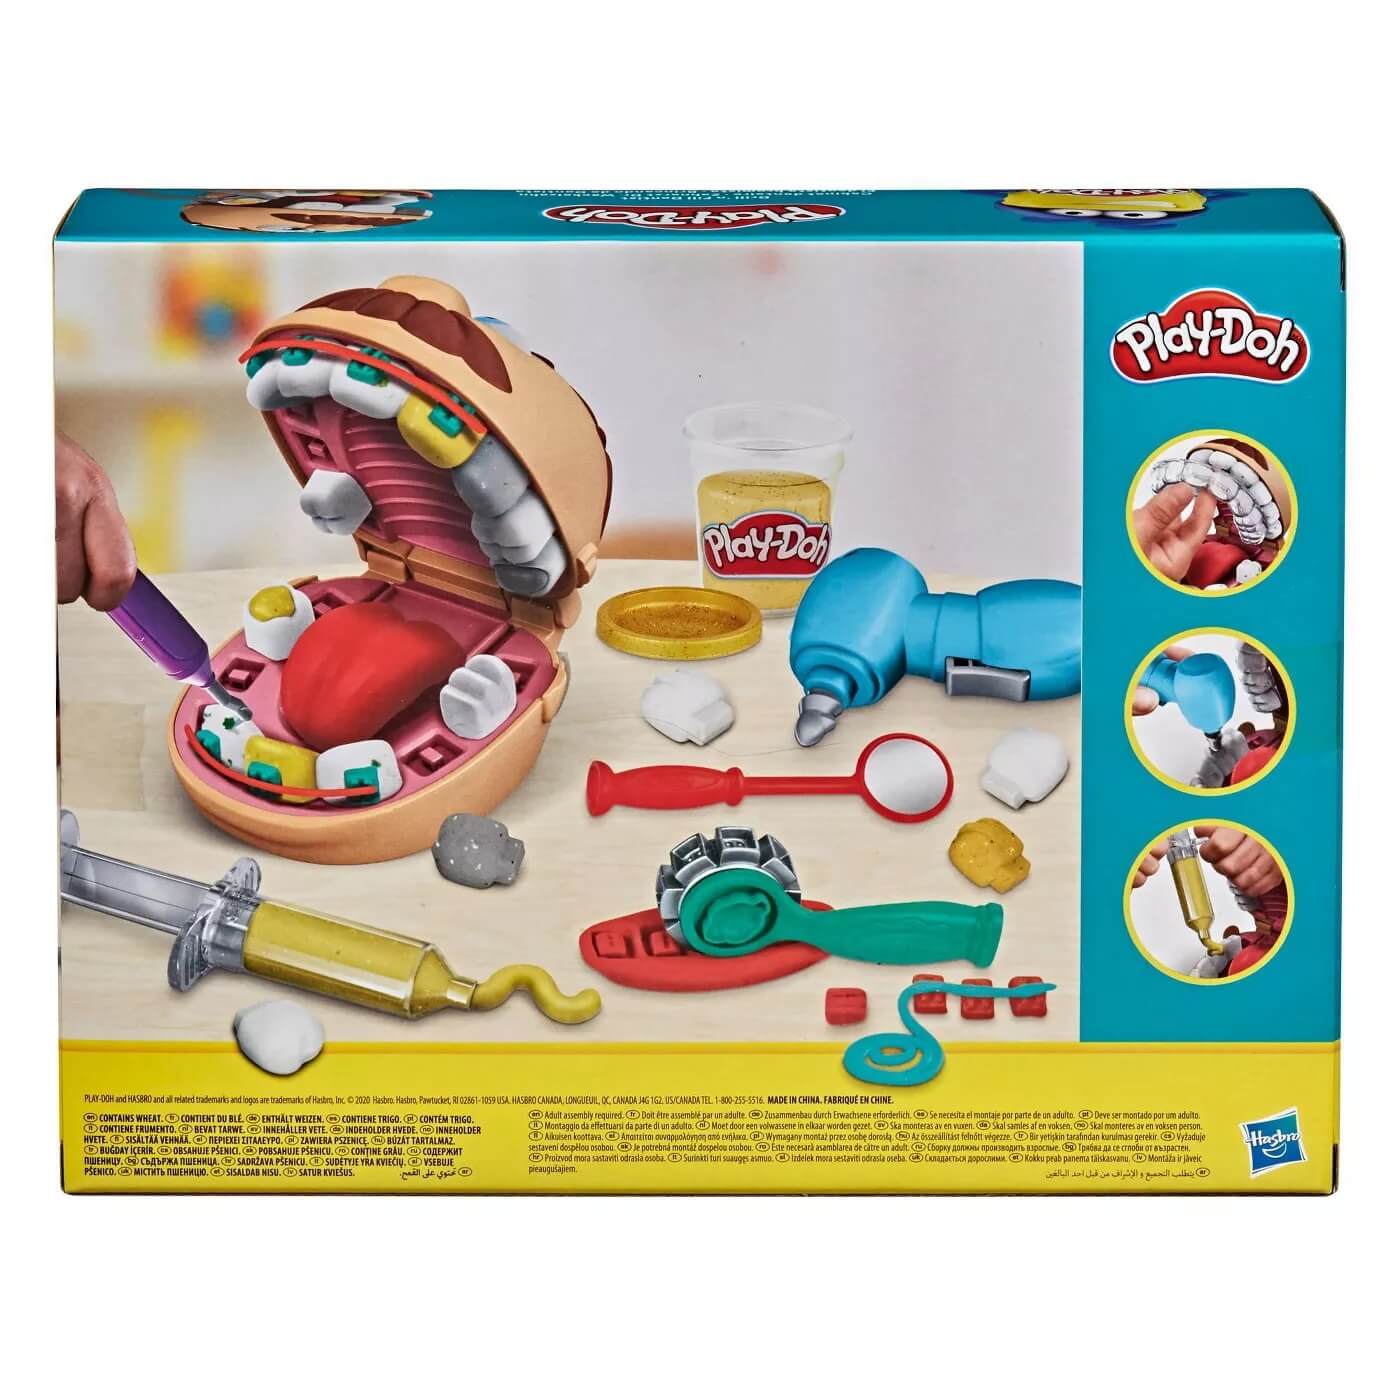 Play-Doh Drill 'n Fill Dentist Modeling Compound Set